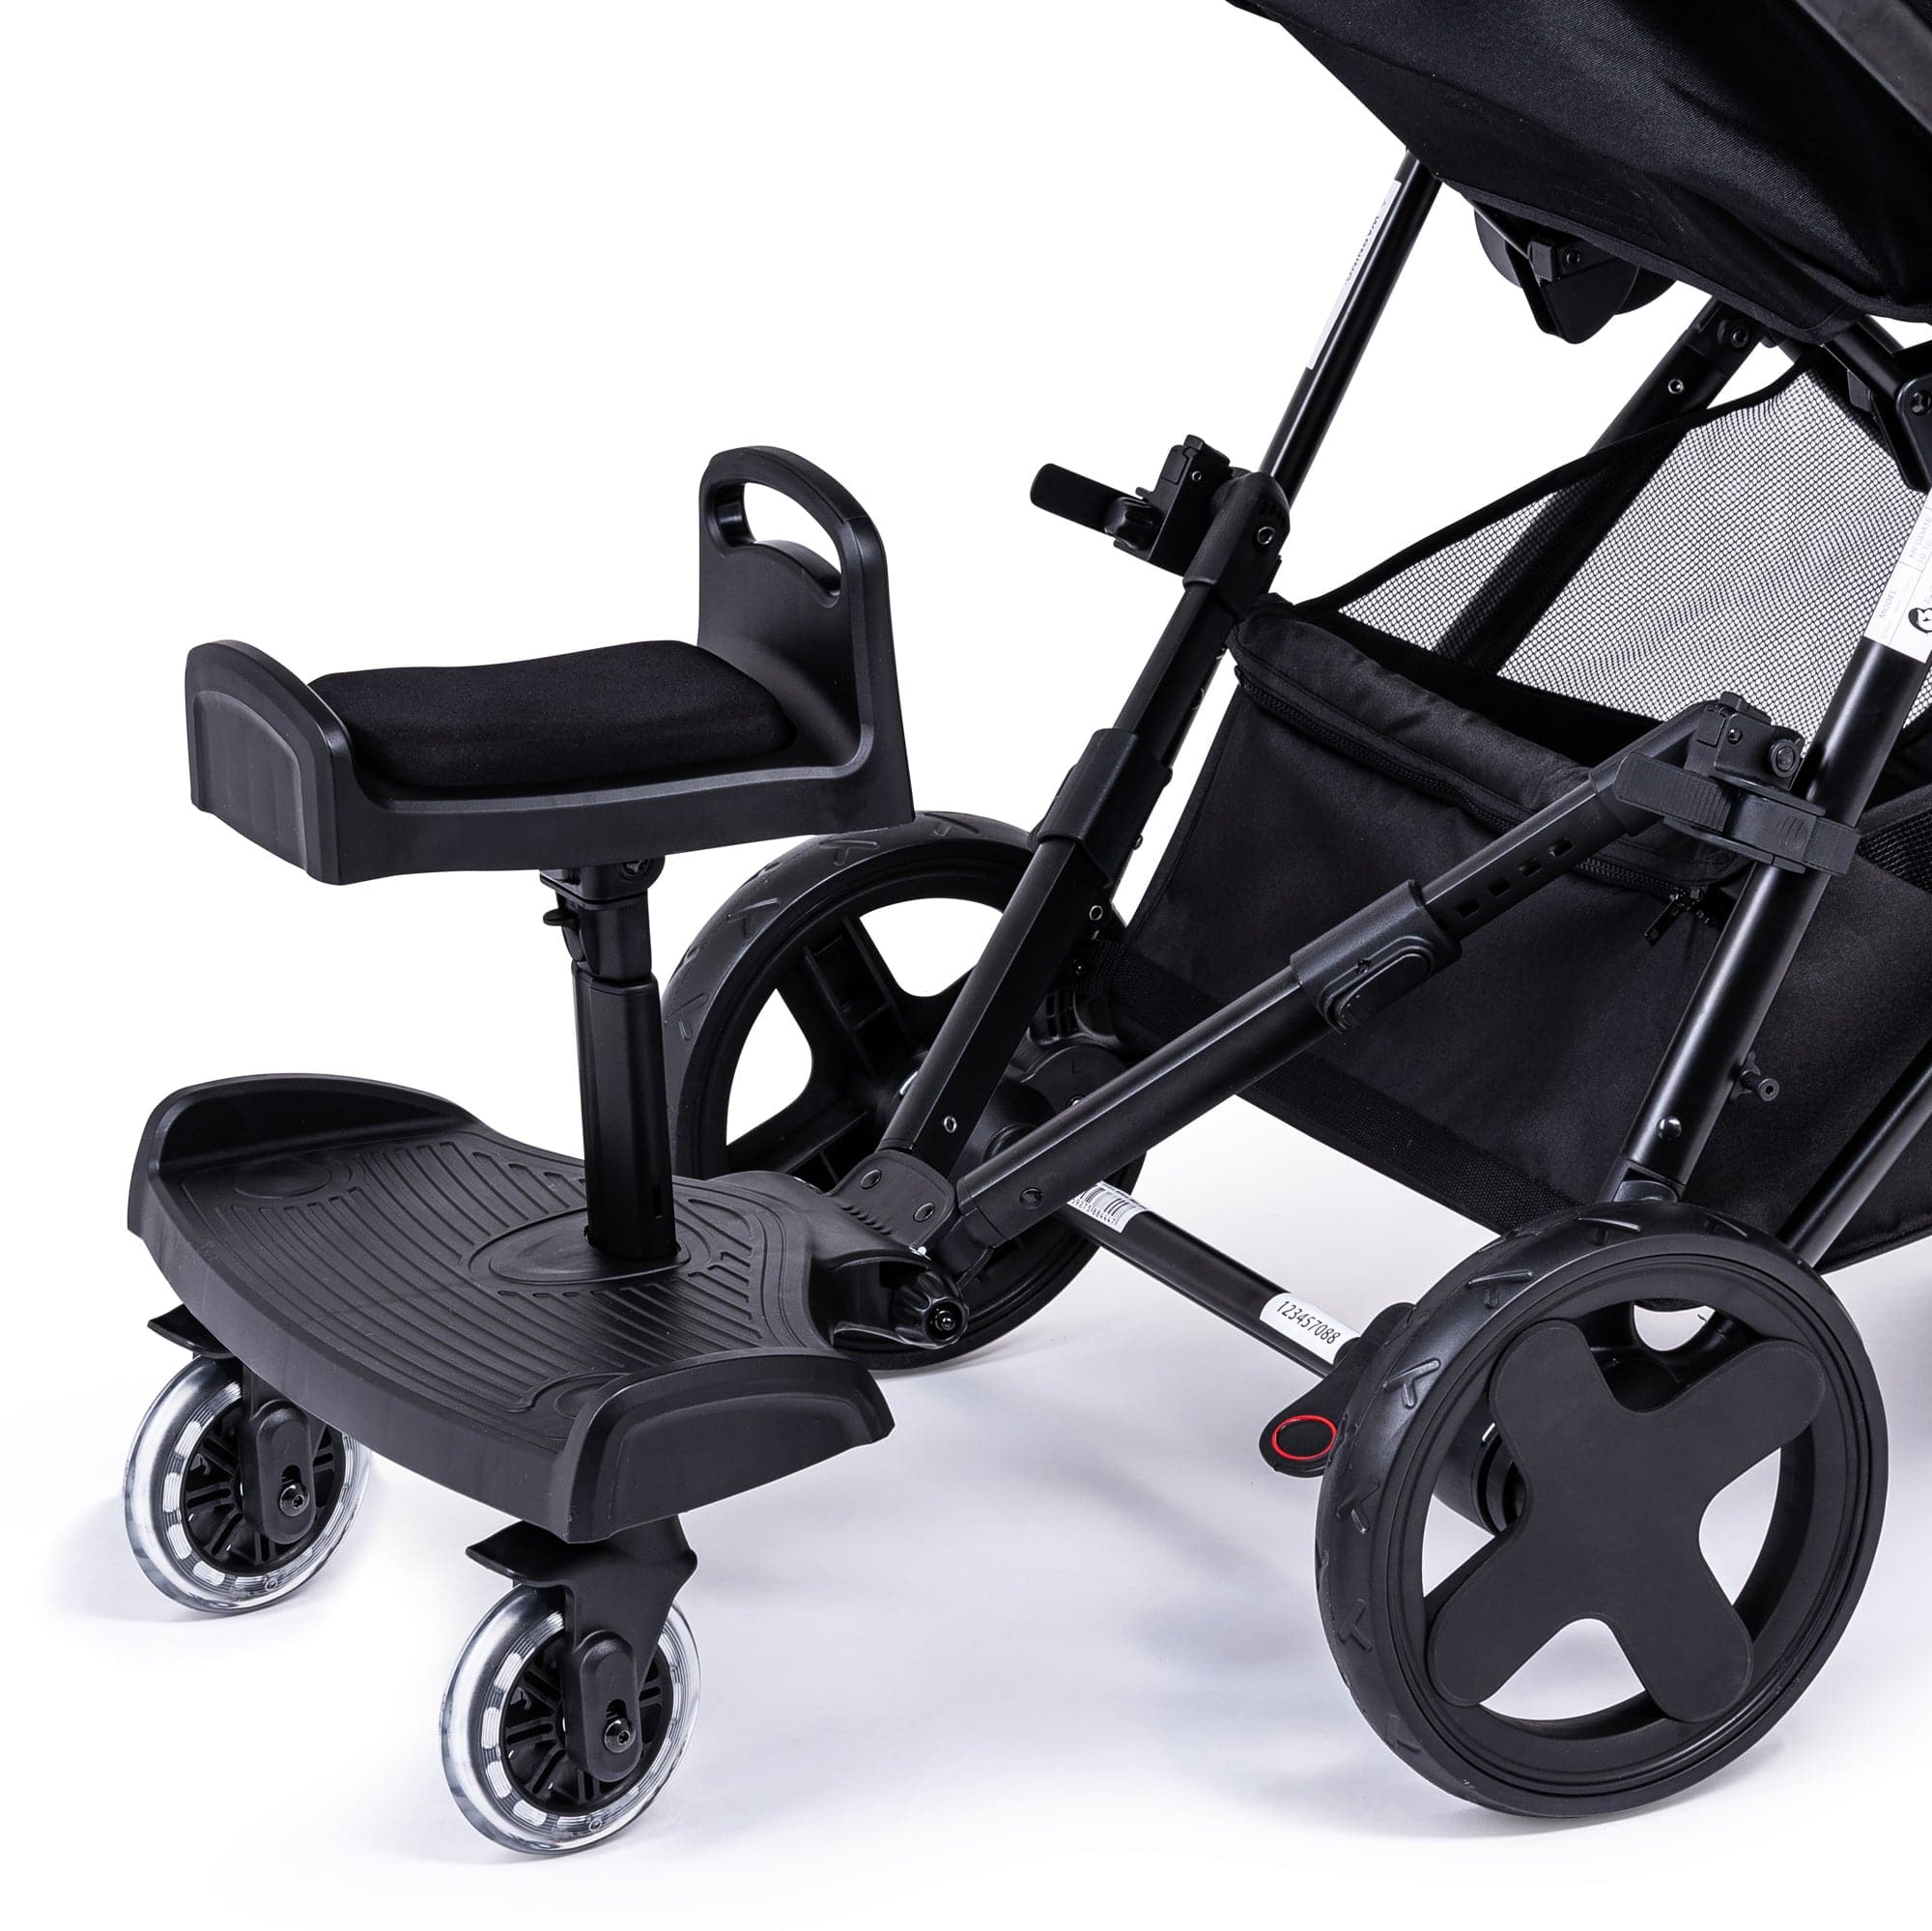 Ride On Board with Seat Compatible with Hesba - For Your Little One